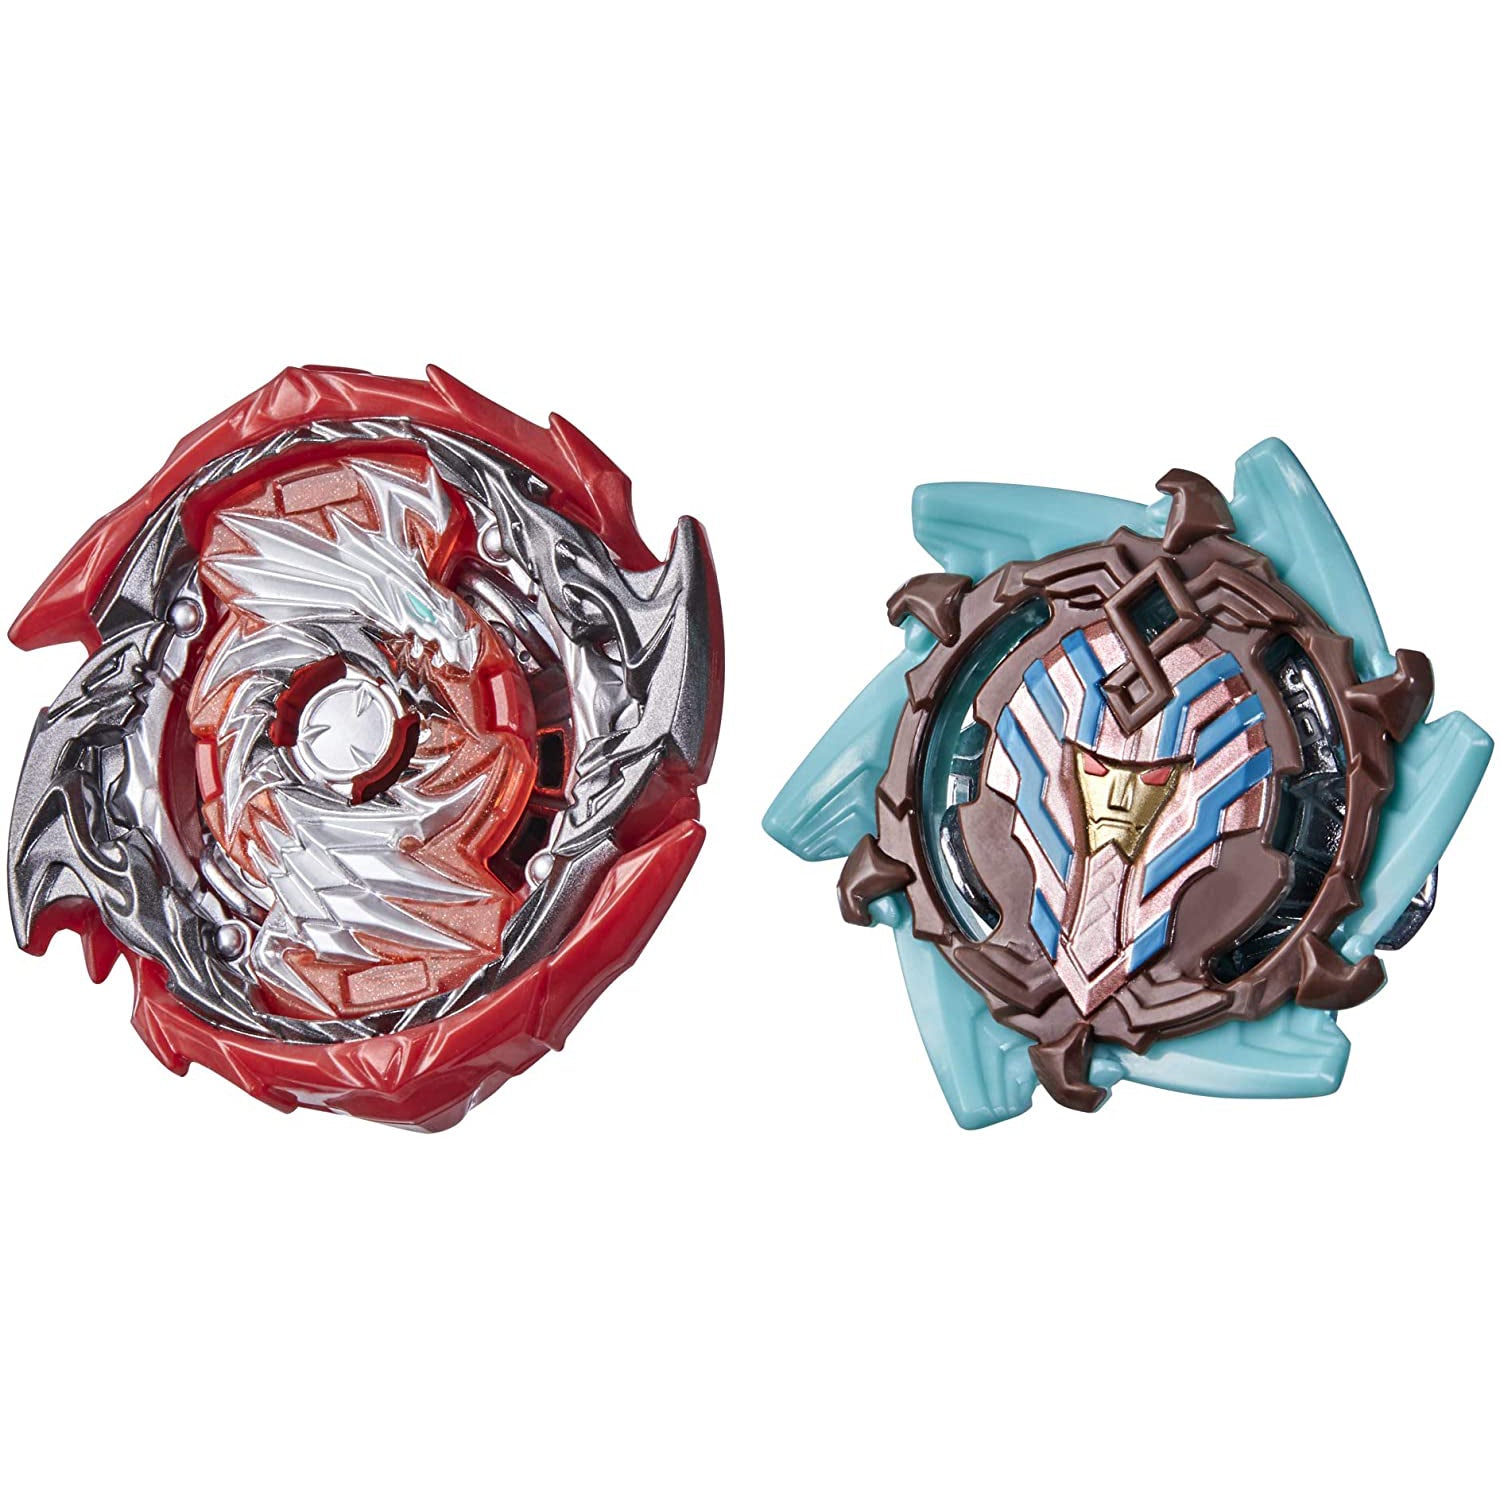 Beyblade Burst Surge Dual Collection Pack Hypersphere Eclipse Evo Devolos D5 and Slingshock Sphinx S4